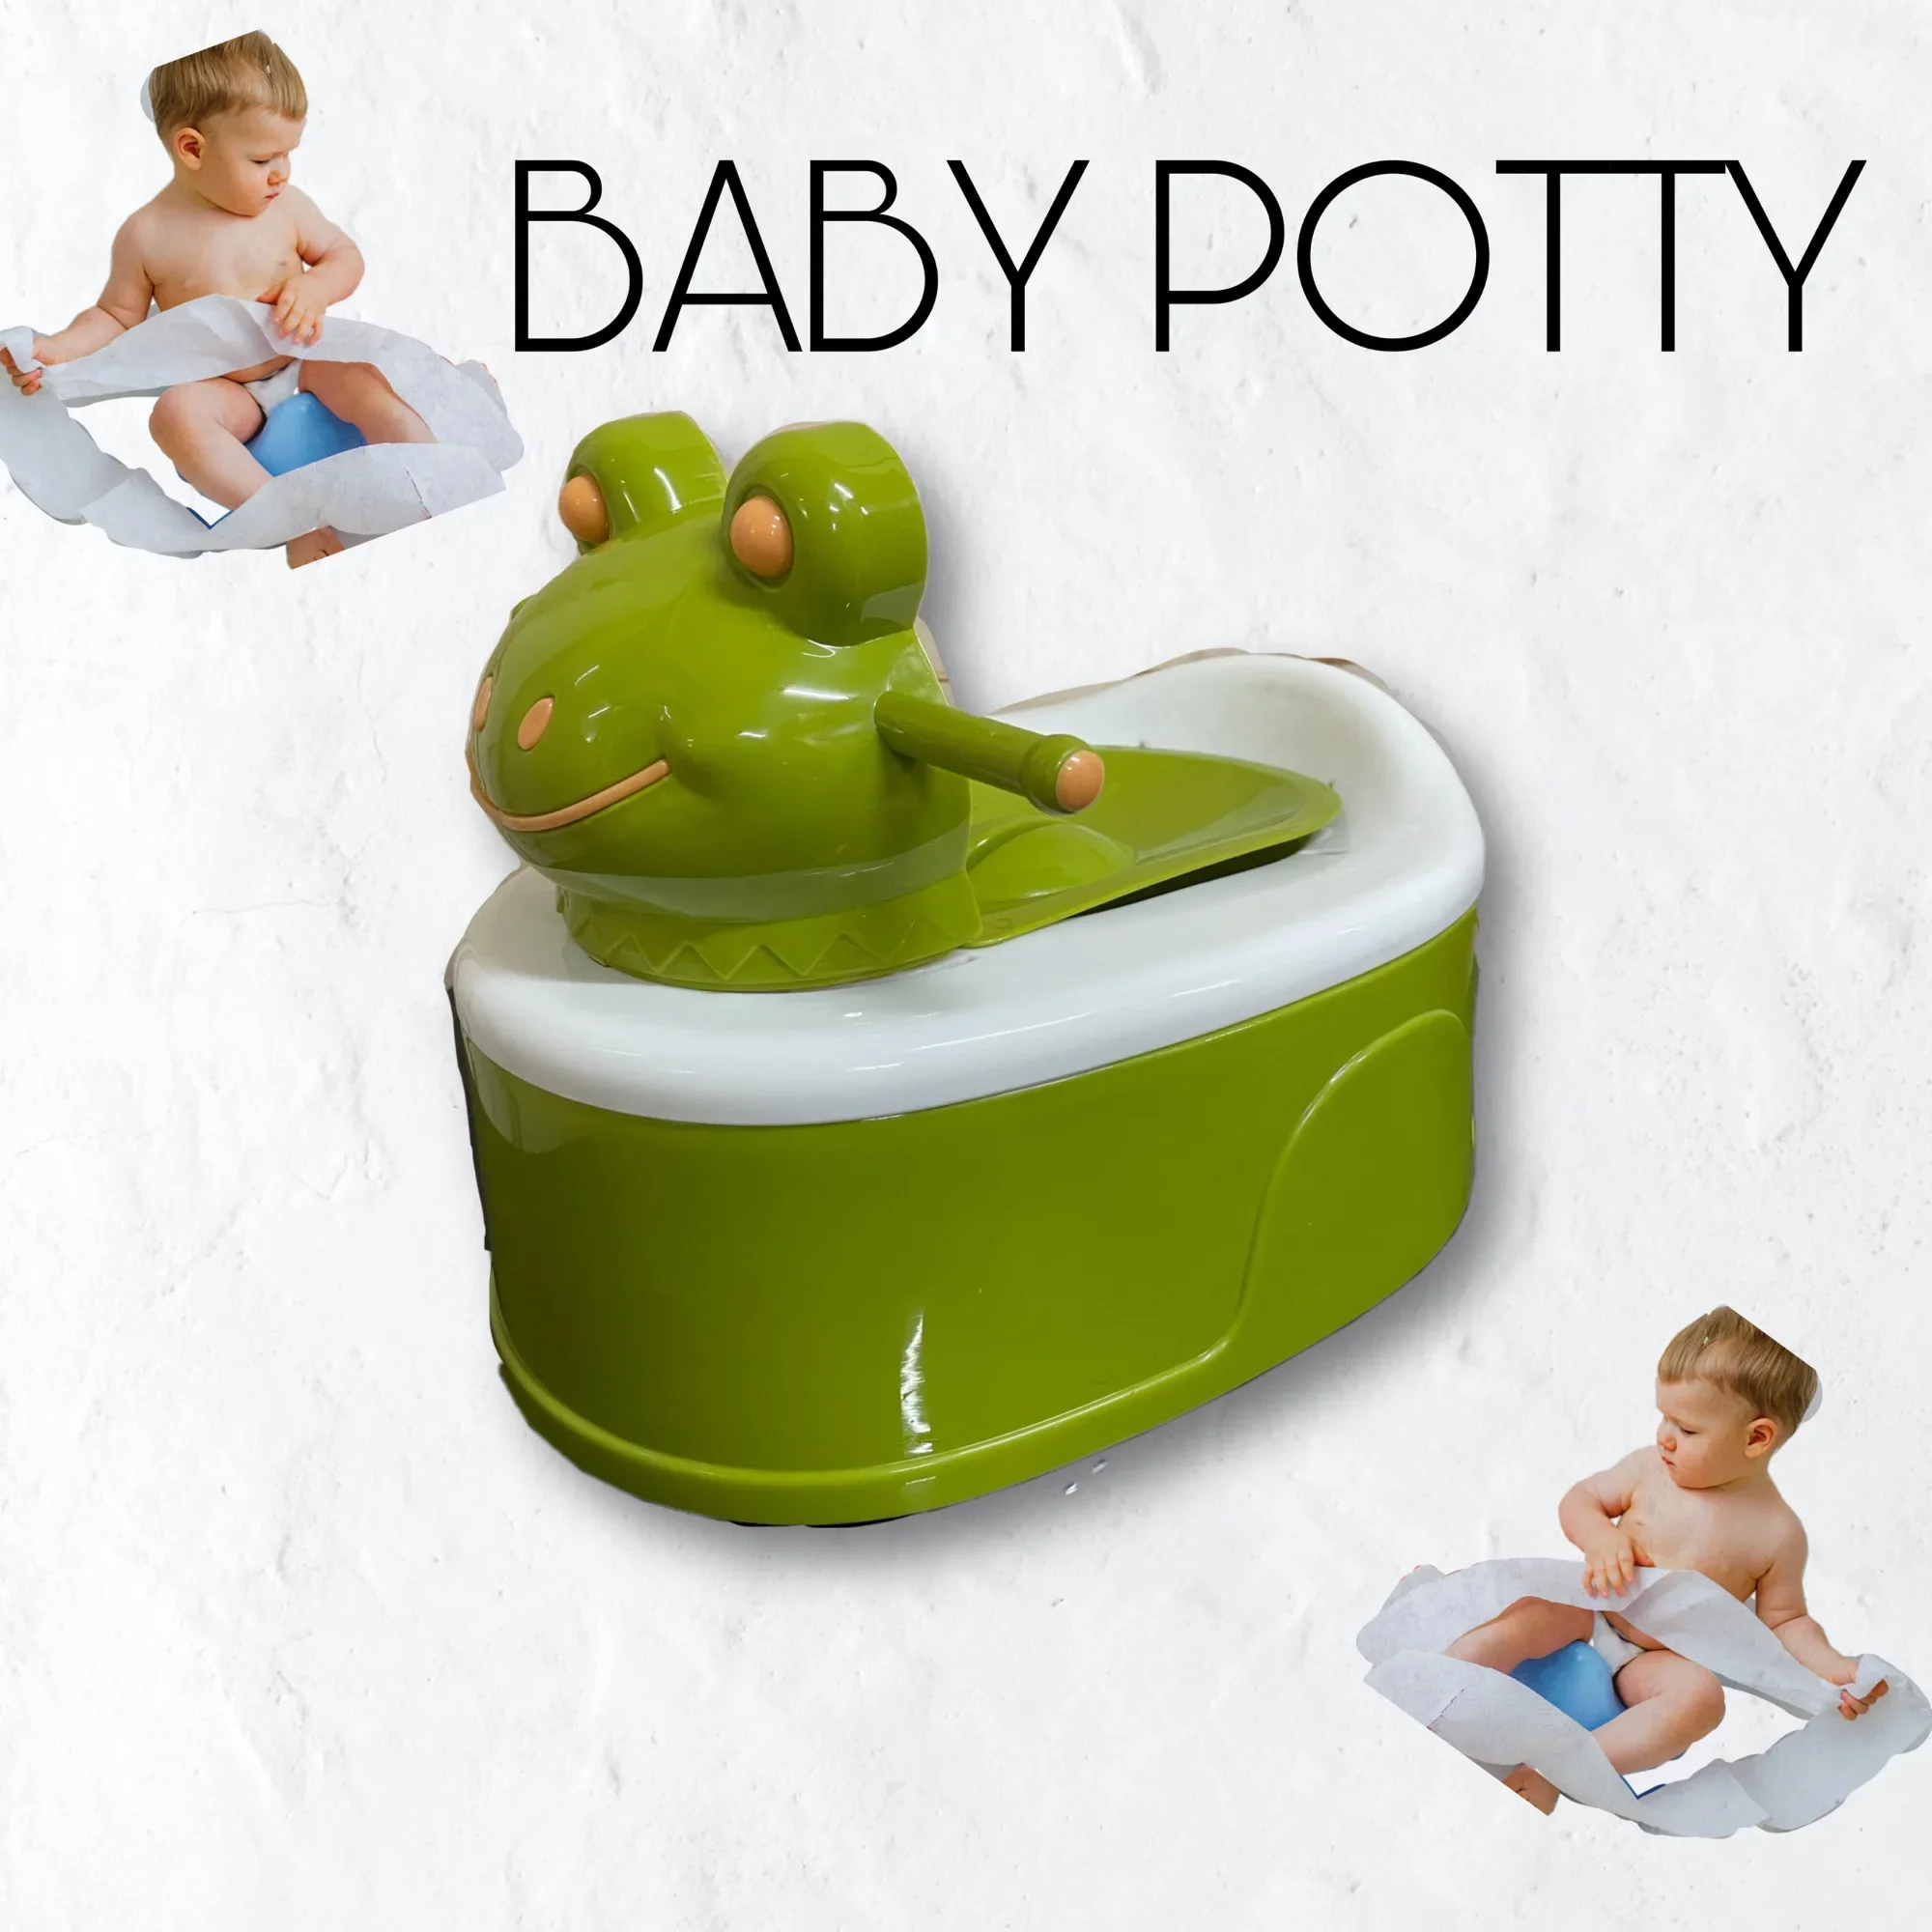 BABY POTTY CHAIR WITH HANDLE, Assorted Toilet Training Seat With Handle